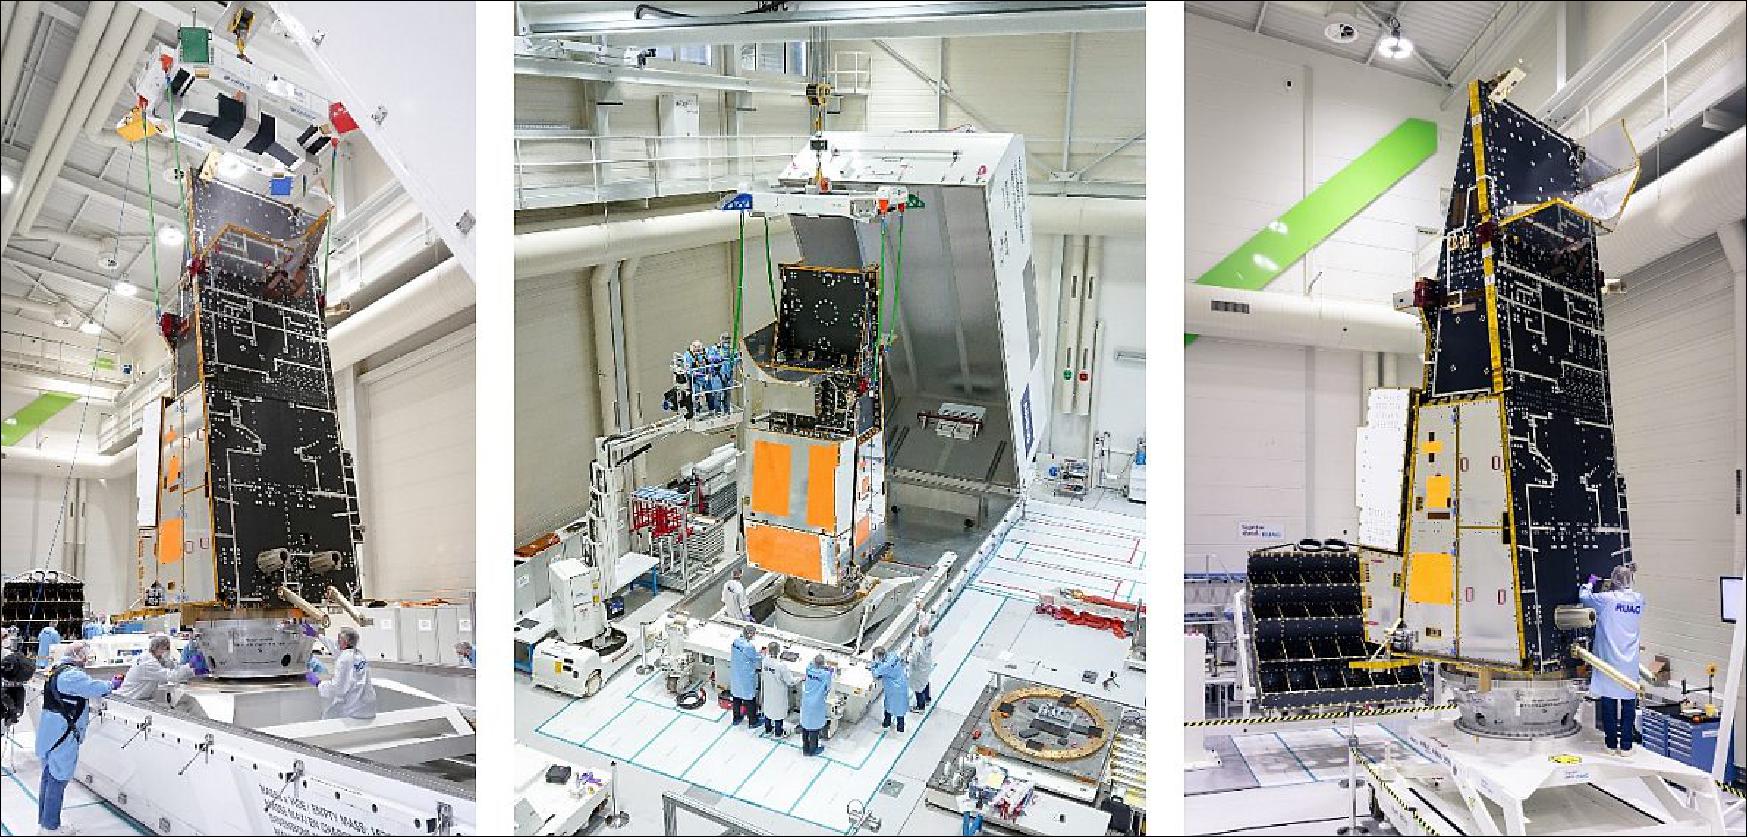 Figure 6: The MetOp-SG satellite structure is loaded into the transport container in Zurich Seebach (image credit: RUAG)